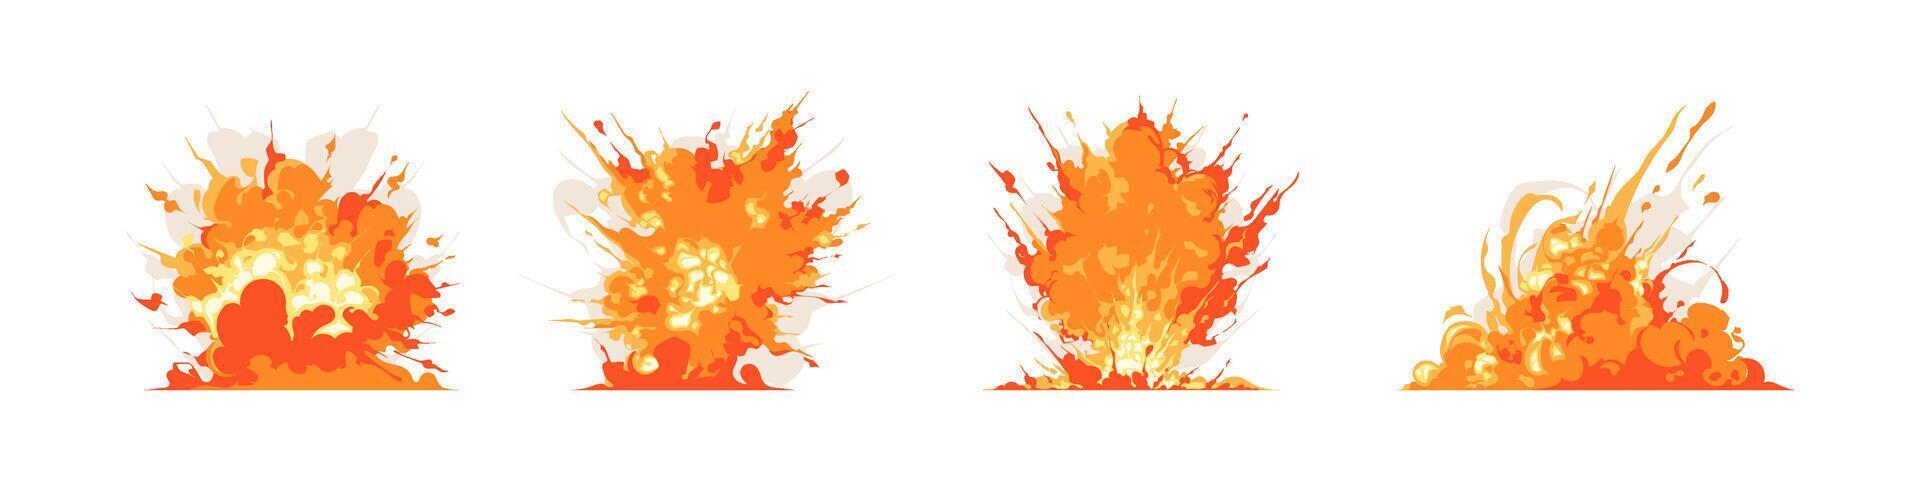 set of burning fire and explosion, fast move trace, splashes, and smoke comic game effect illustration vector